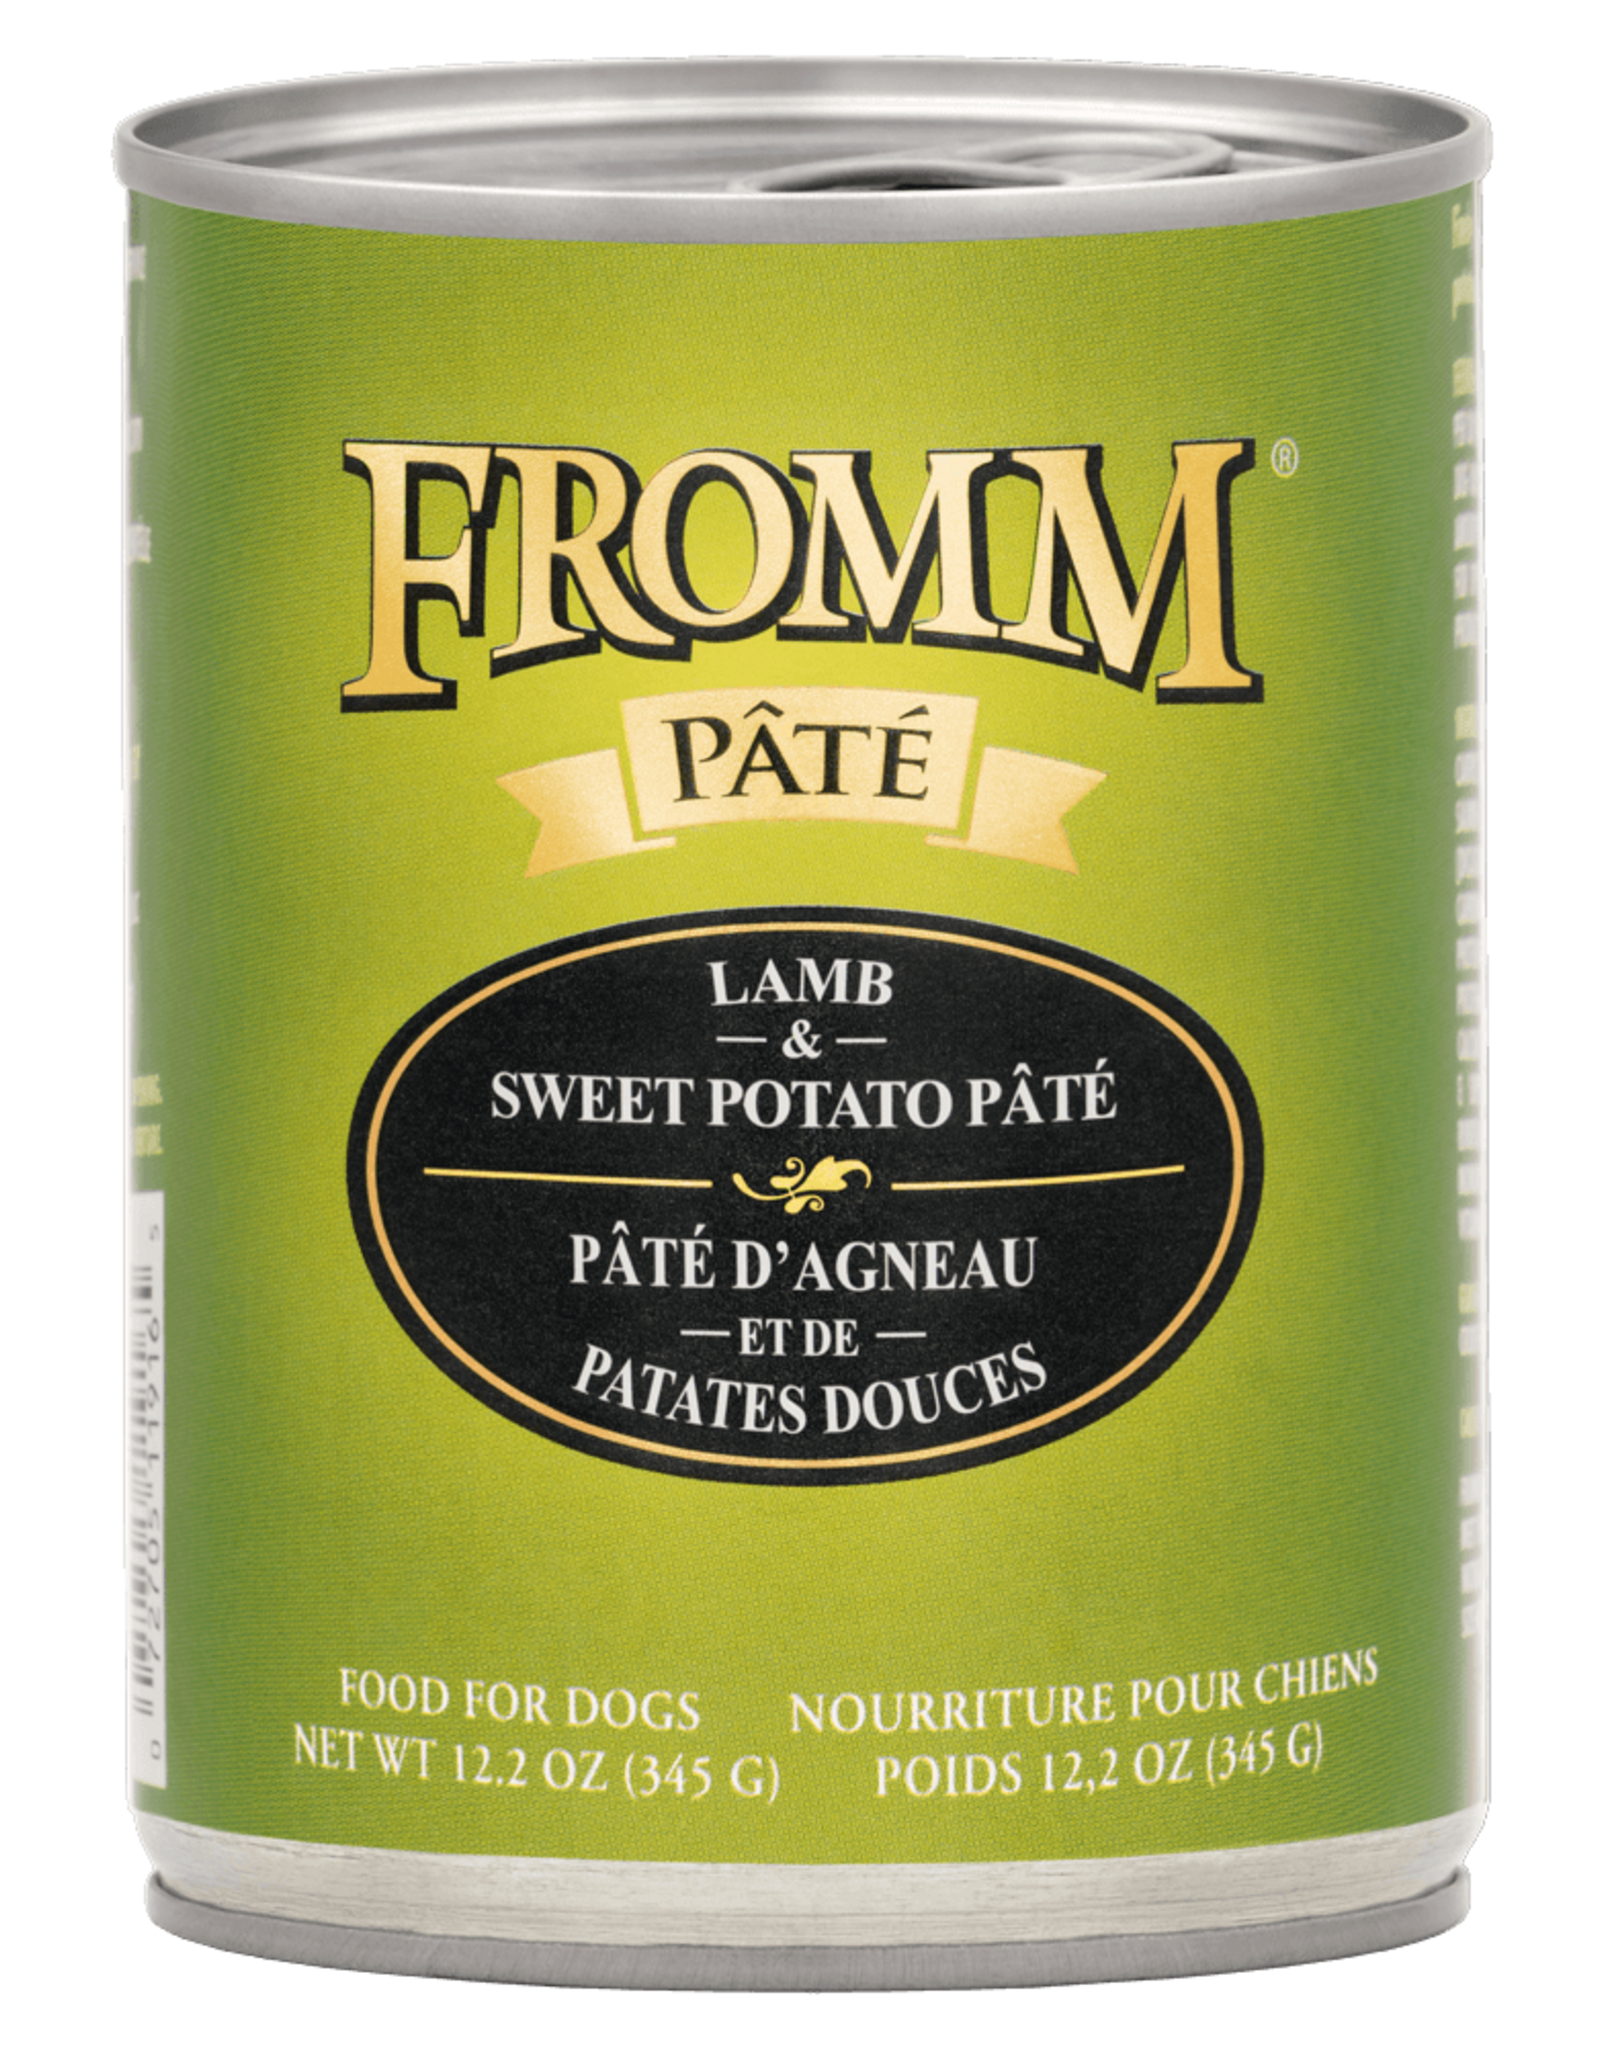 FROMM FROMM GOLD LAMB & SWEET POTATO PATE 12.2 OZ